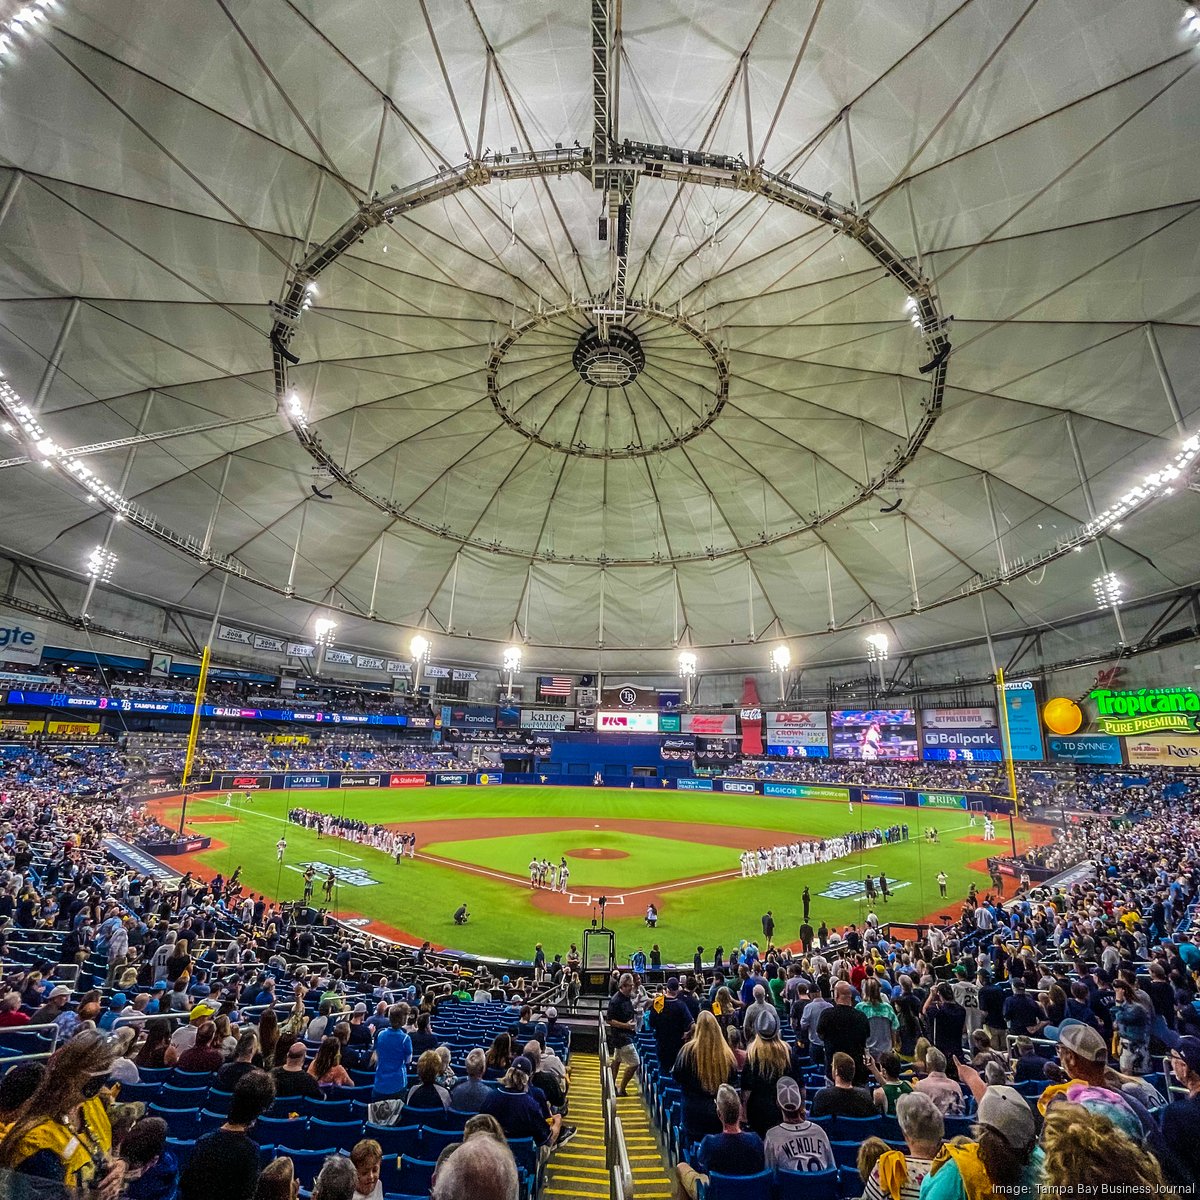 Tampa Bay Rays gets buyer interest from Dex Imaging CEO, report